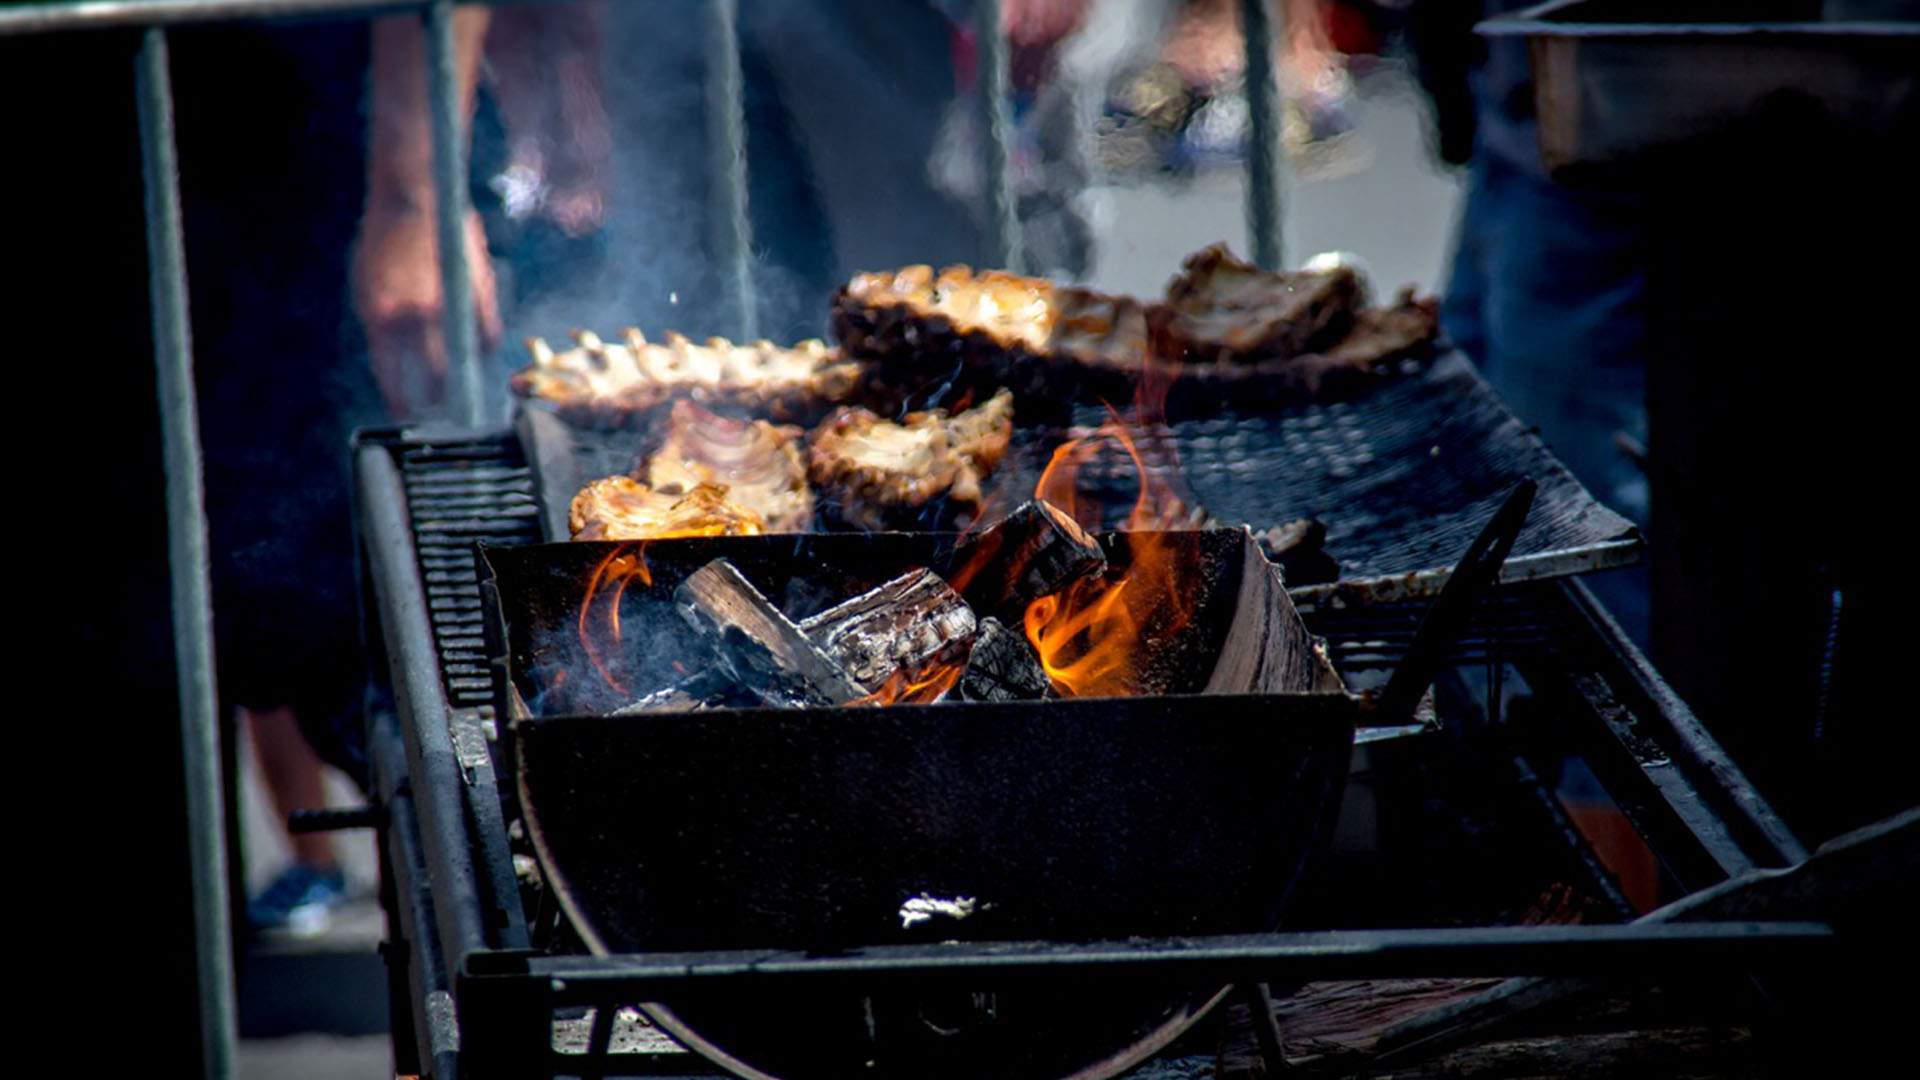 Win the Chance to Eat and Judge 30 Courses of Barbecue at Melbourne's Meatstock Festival